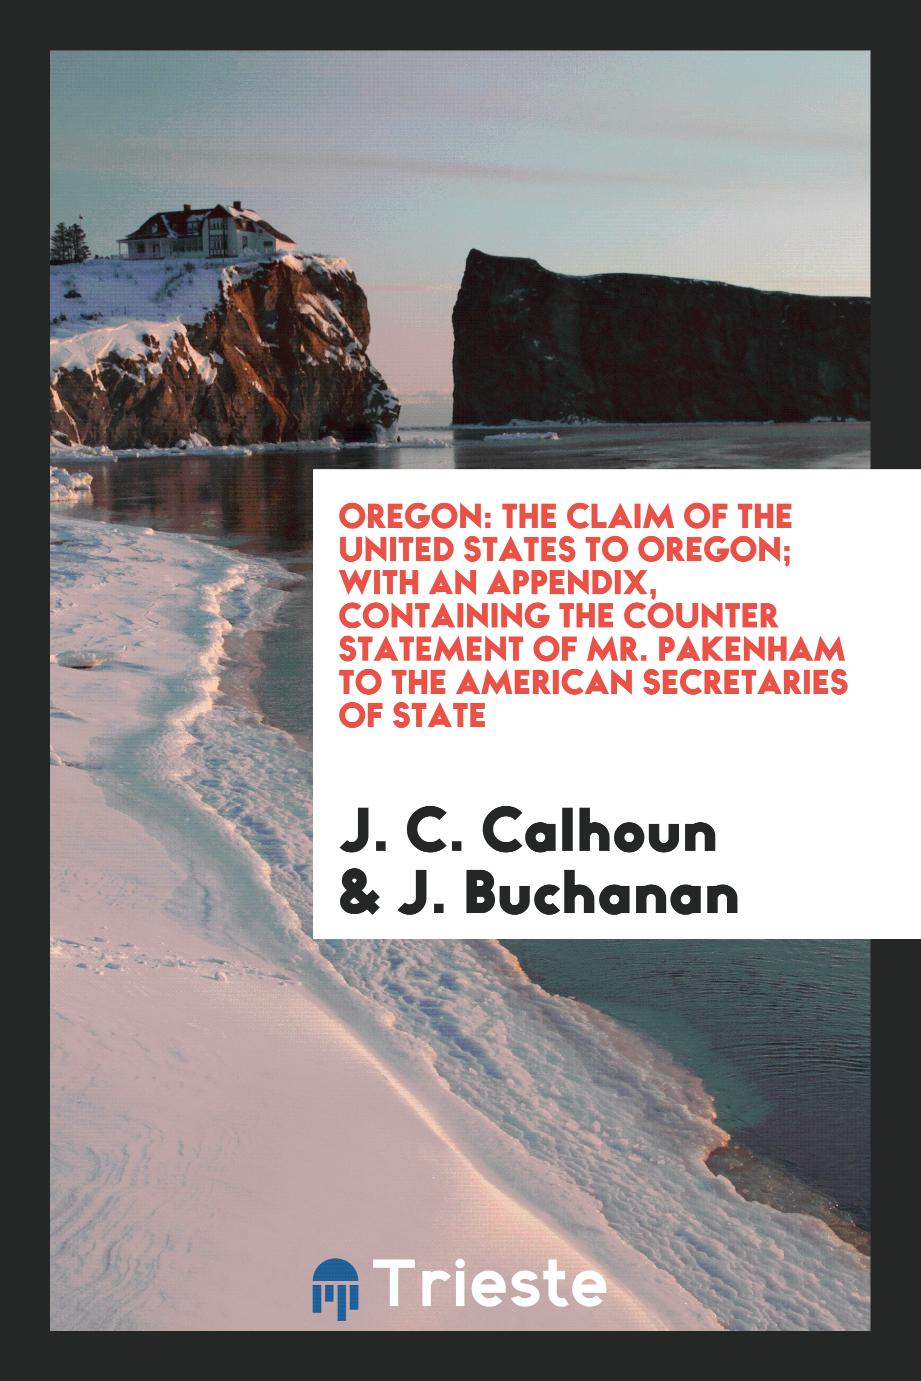 Oregon: The claim of the United States to Oregon; With an Appendix, containing the Counter Statement of Mr. Pakenham to the American Secretaries of State